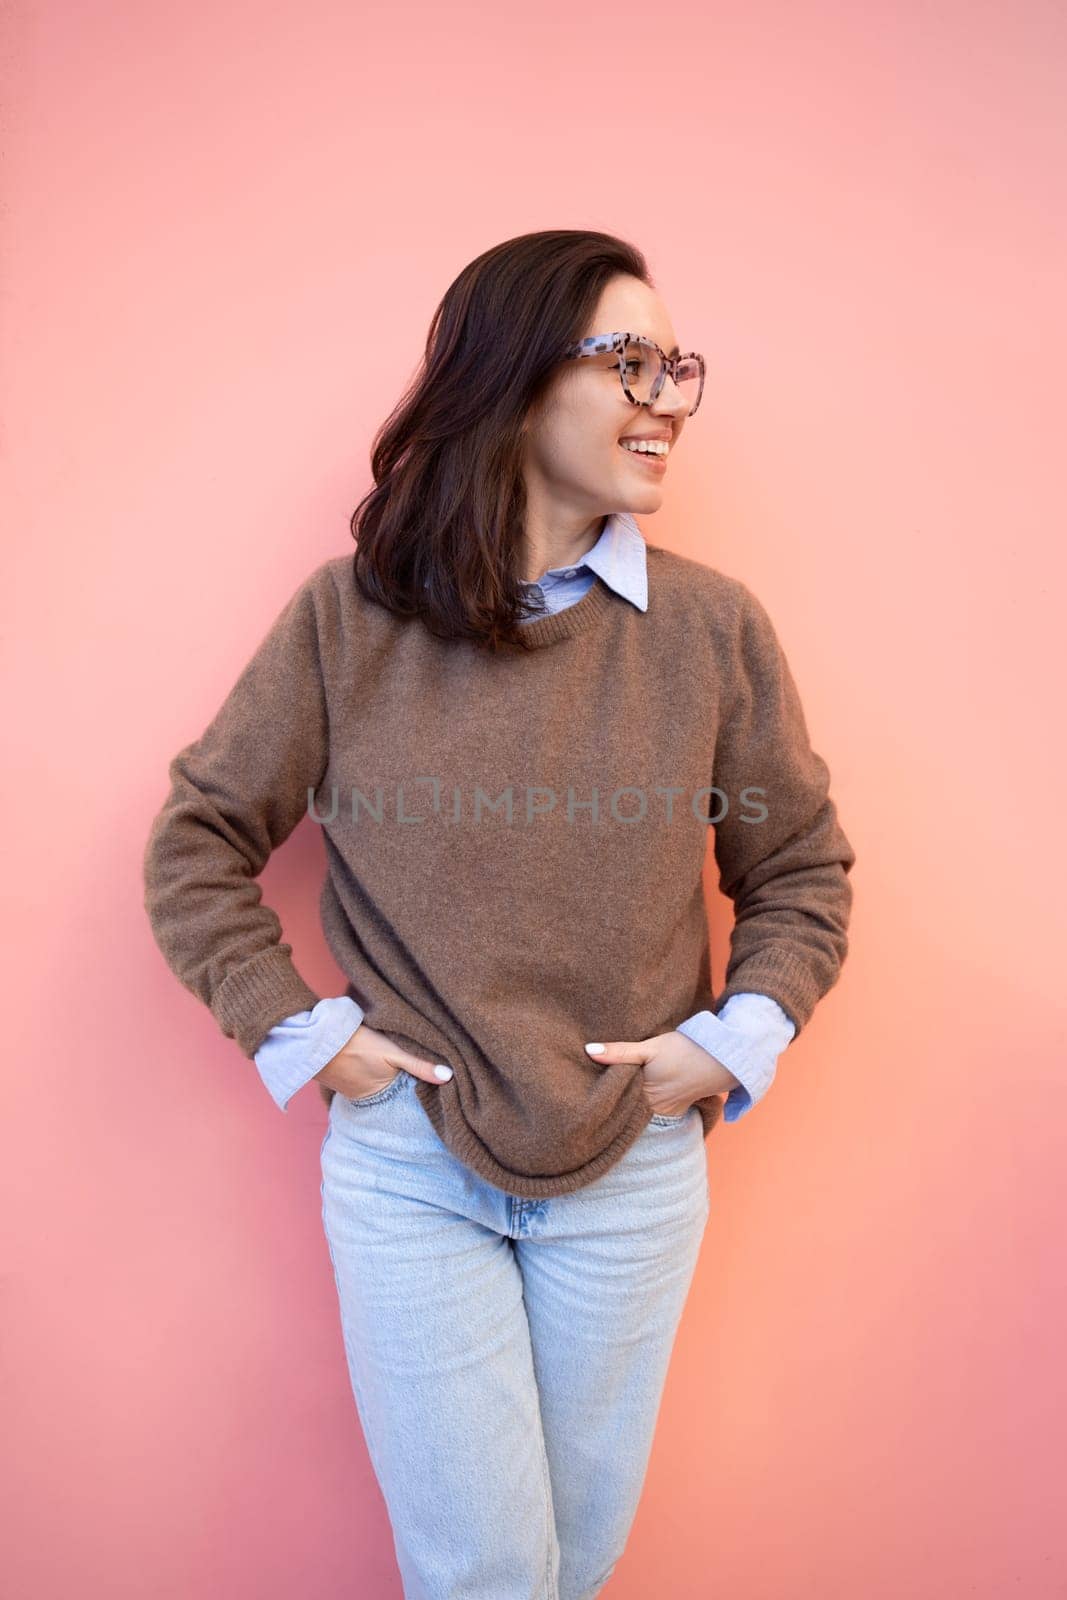 Happy woman in glasses outdoor on yellow and pink color background. Positive people concept. Smiling girl looking side, hands in pocket, dressed sweater and jeans. Vertical photo